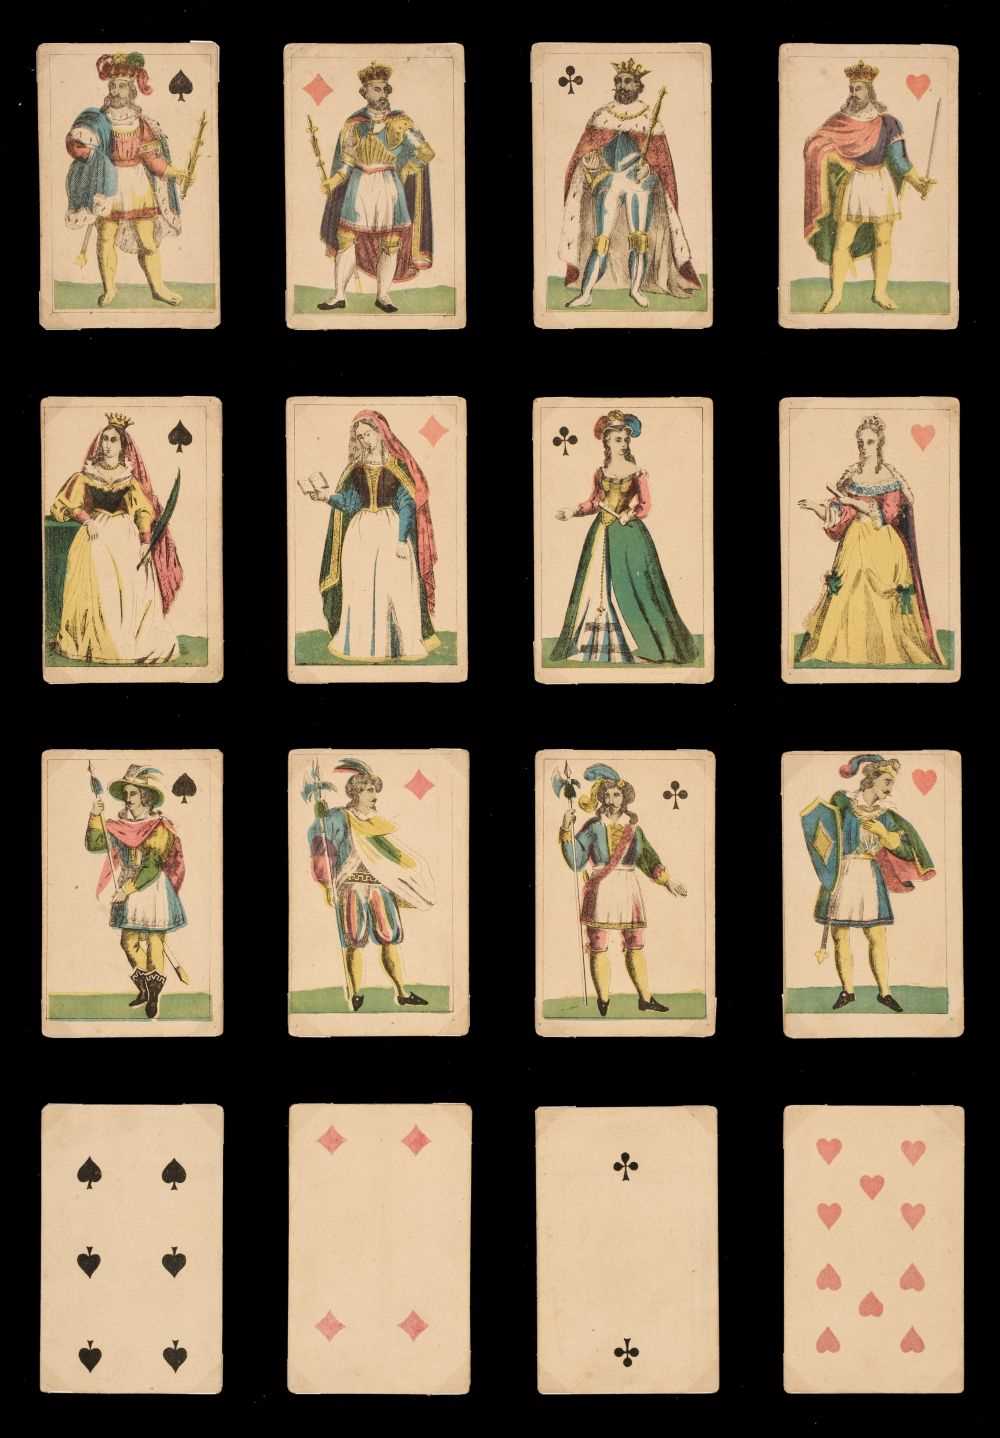 Lot 460 - Translucent playing cards. Translucent playing cards with hidden erotic illustrations, c.1865